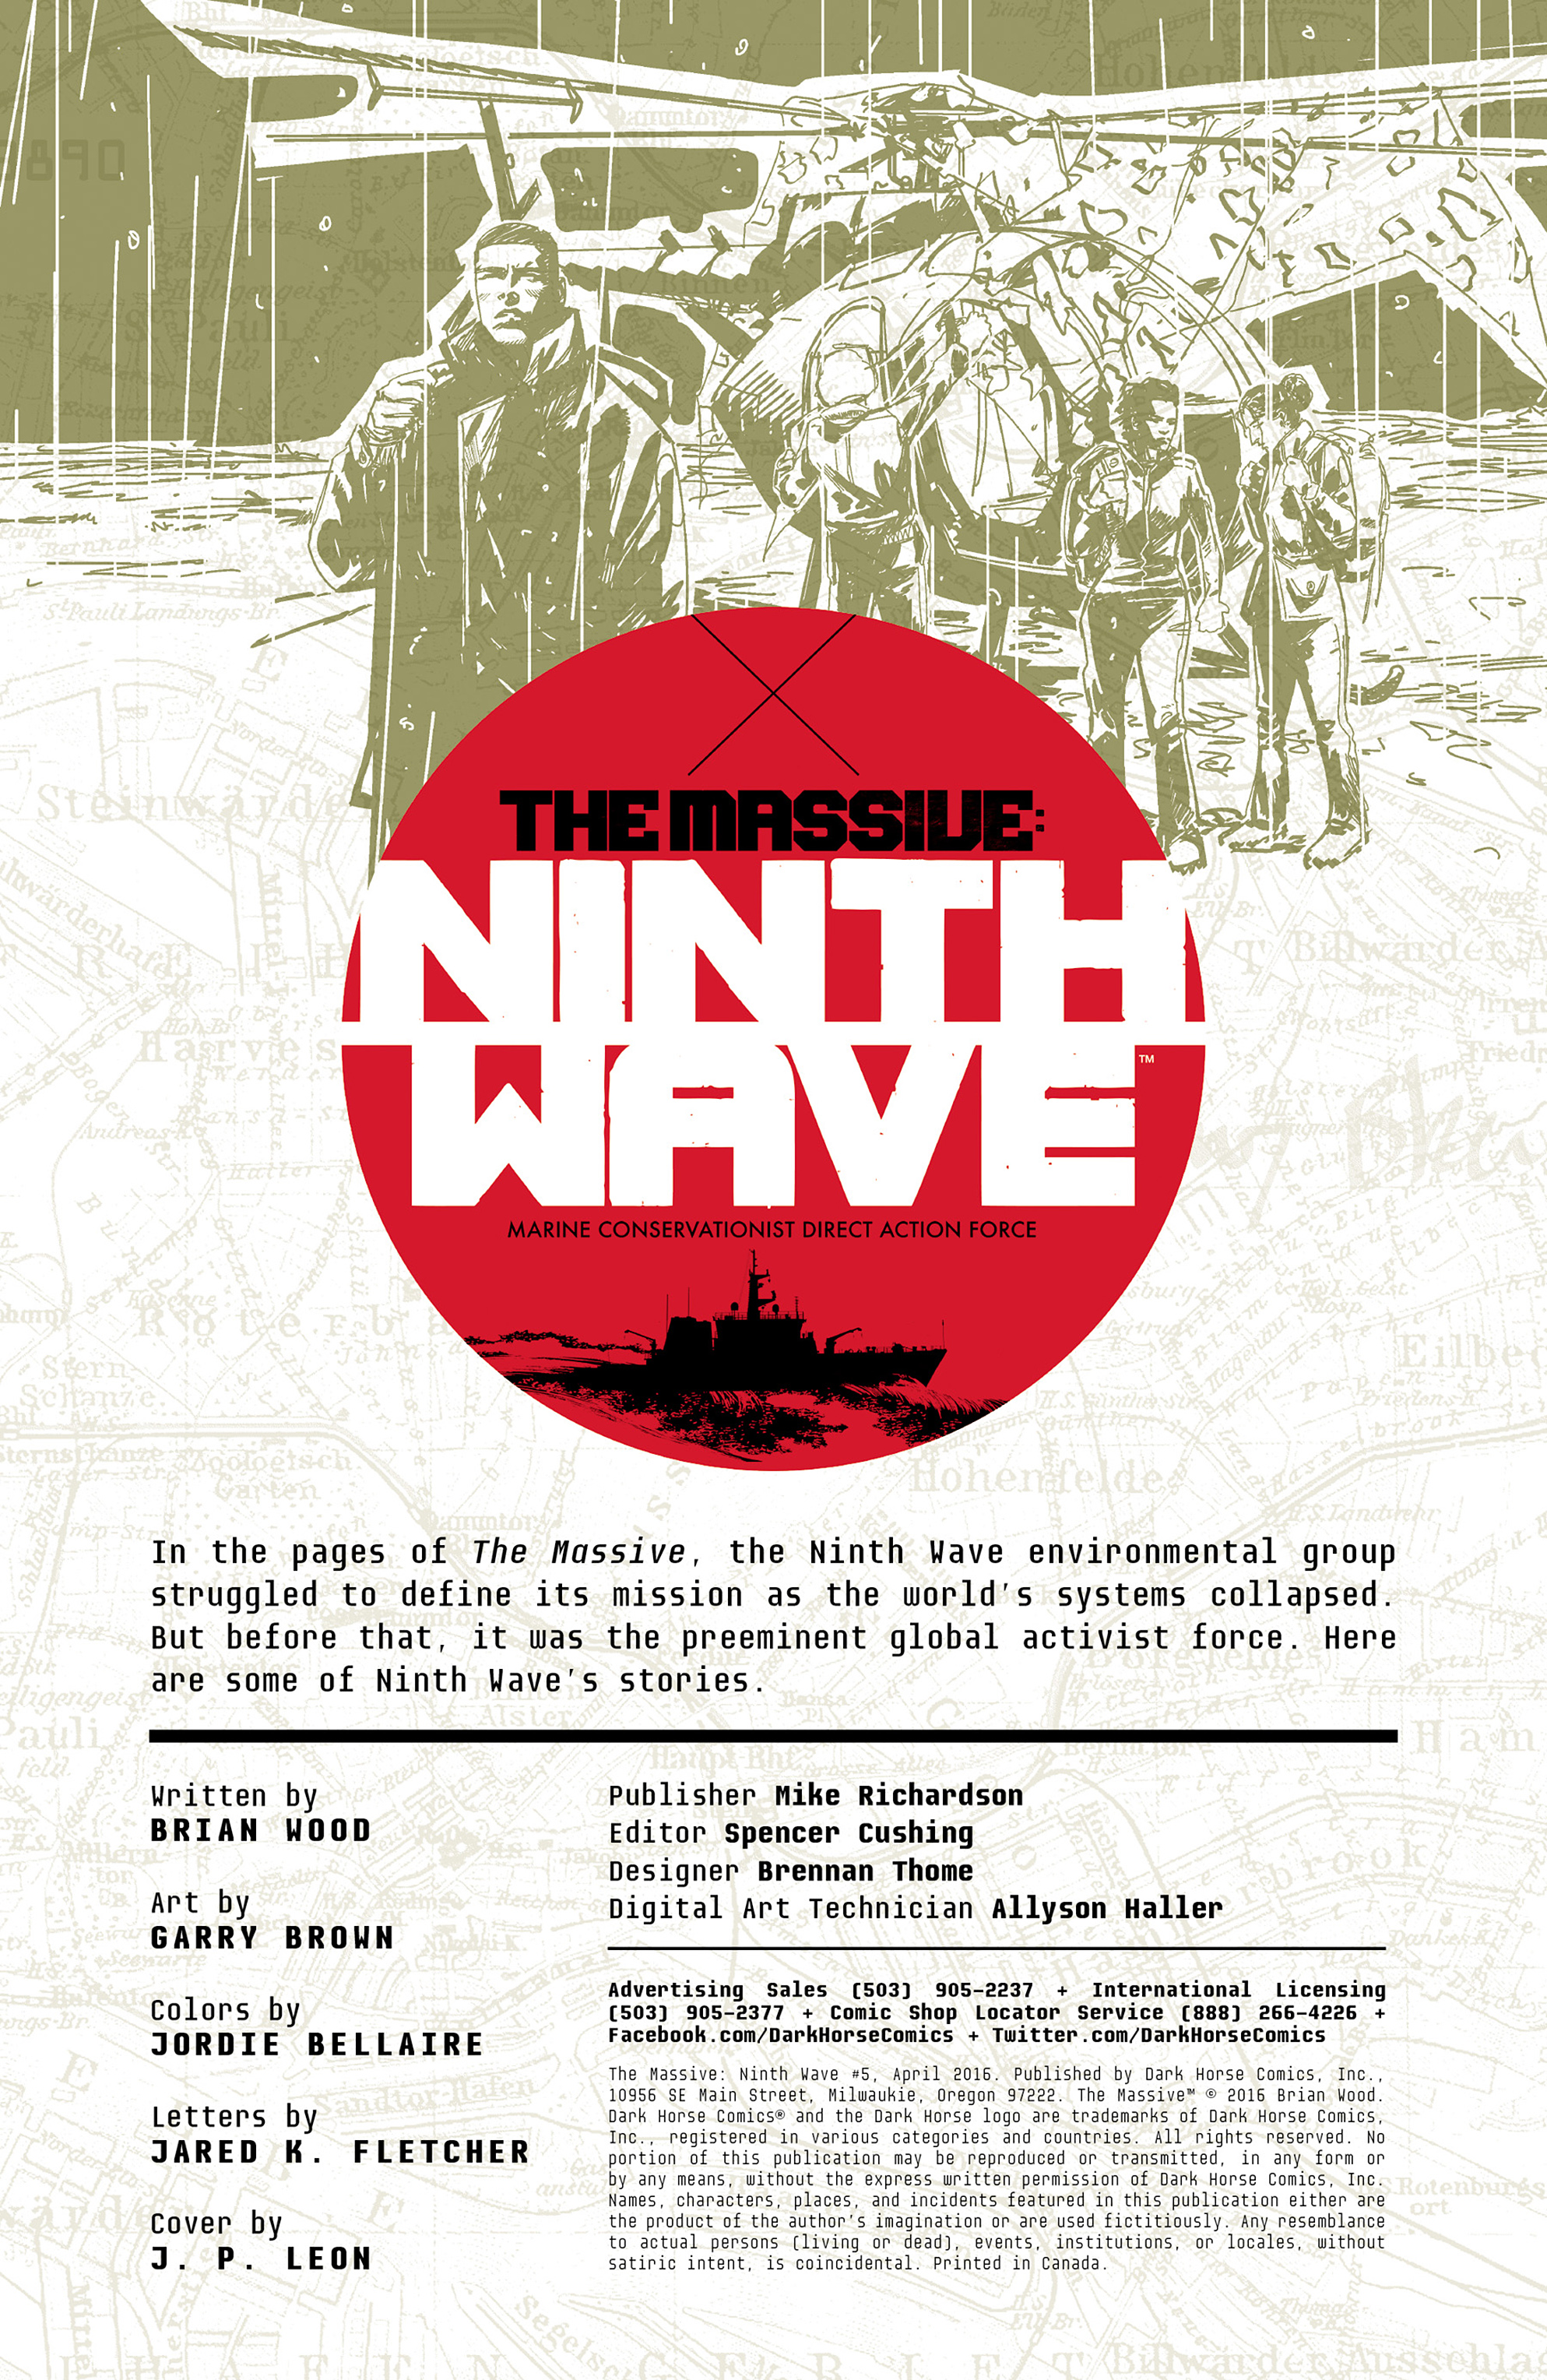 Read online The Massive: Ninth Wave comic -  Issue #5 - 2